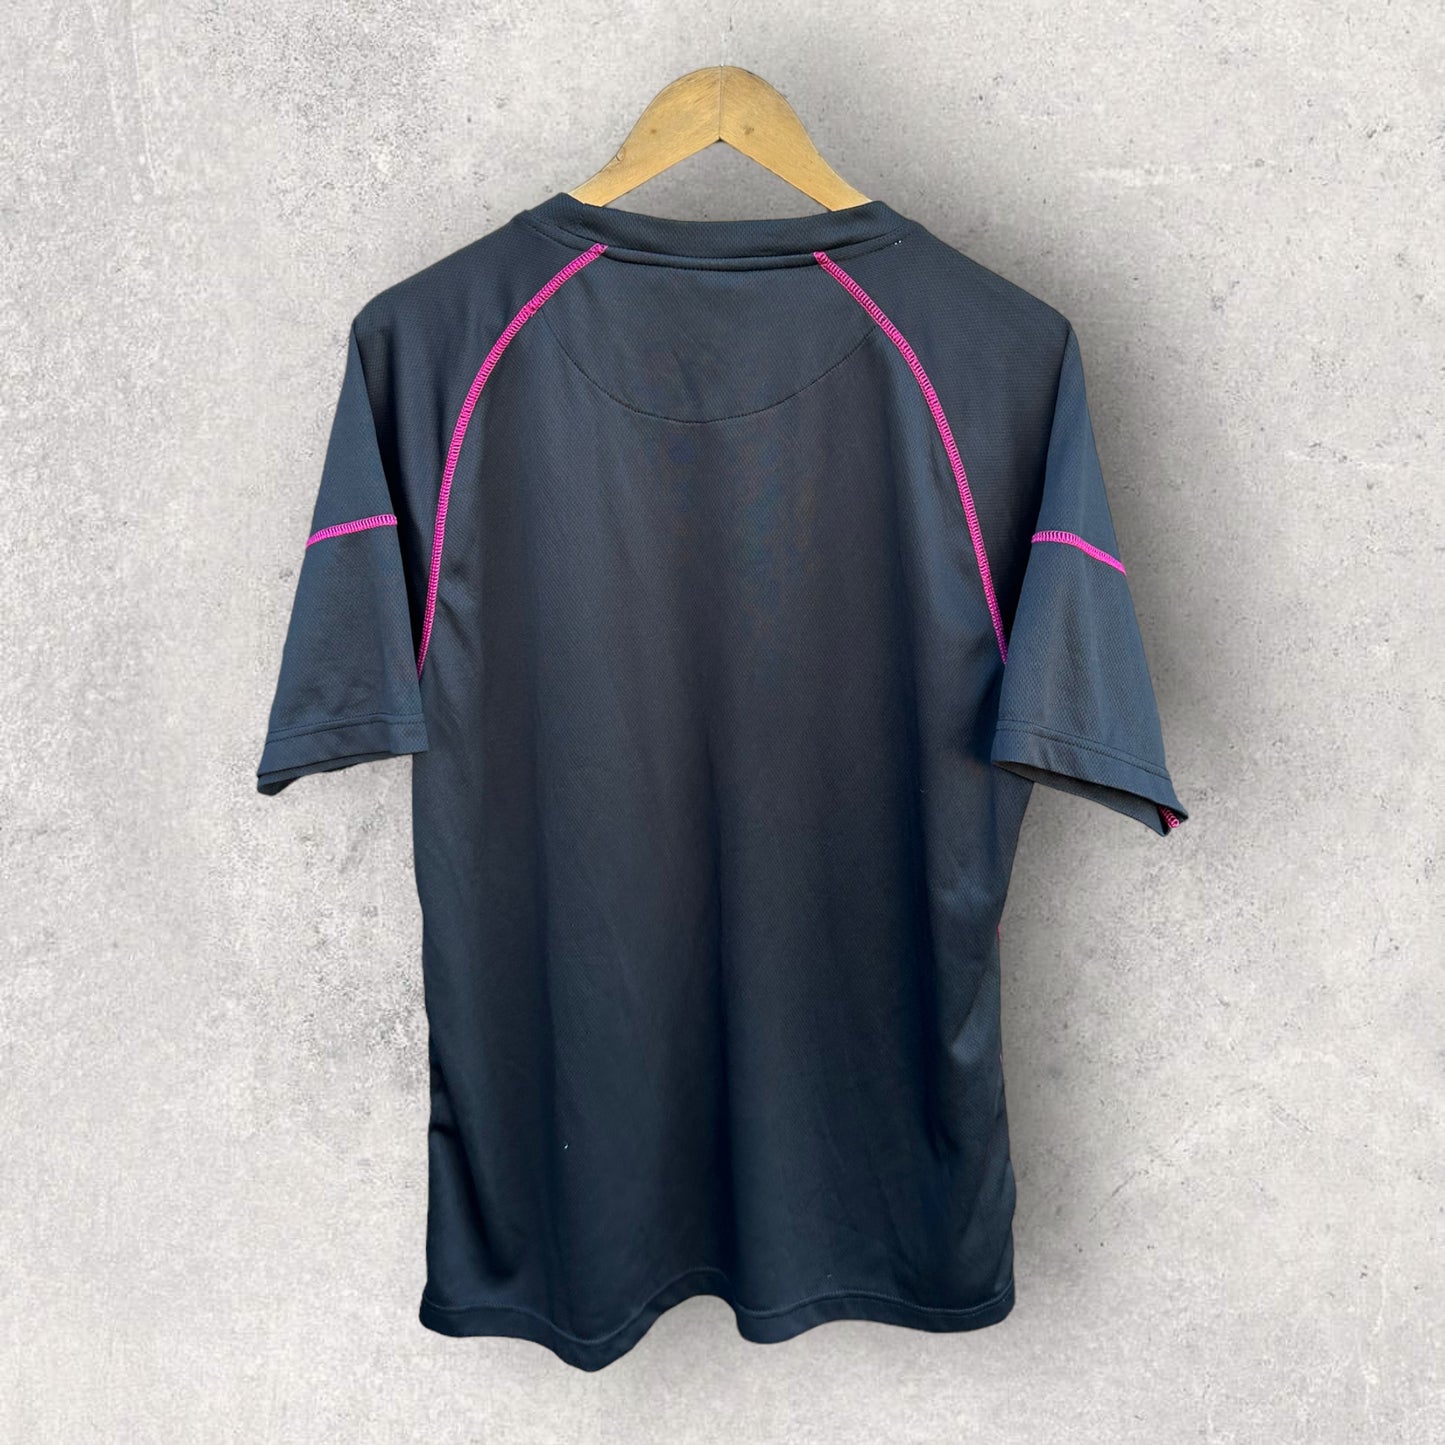 NSW POLICE COWS RUGBY TRAINING SHIRT